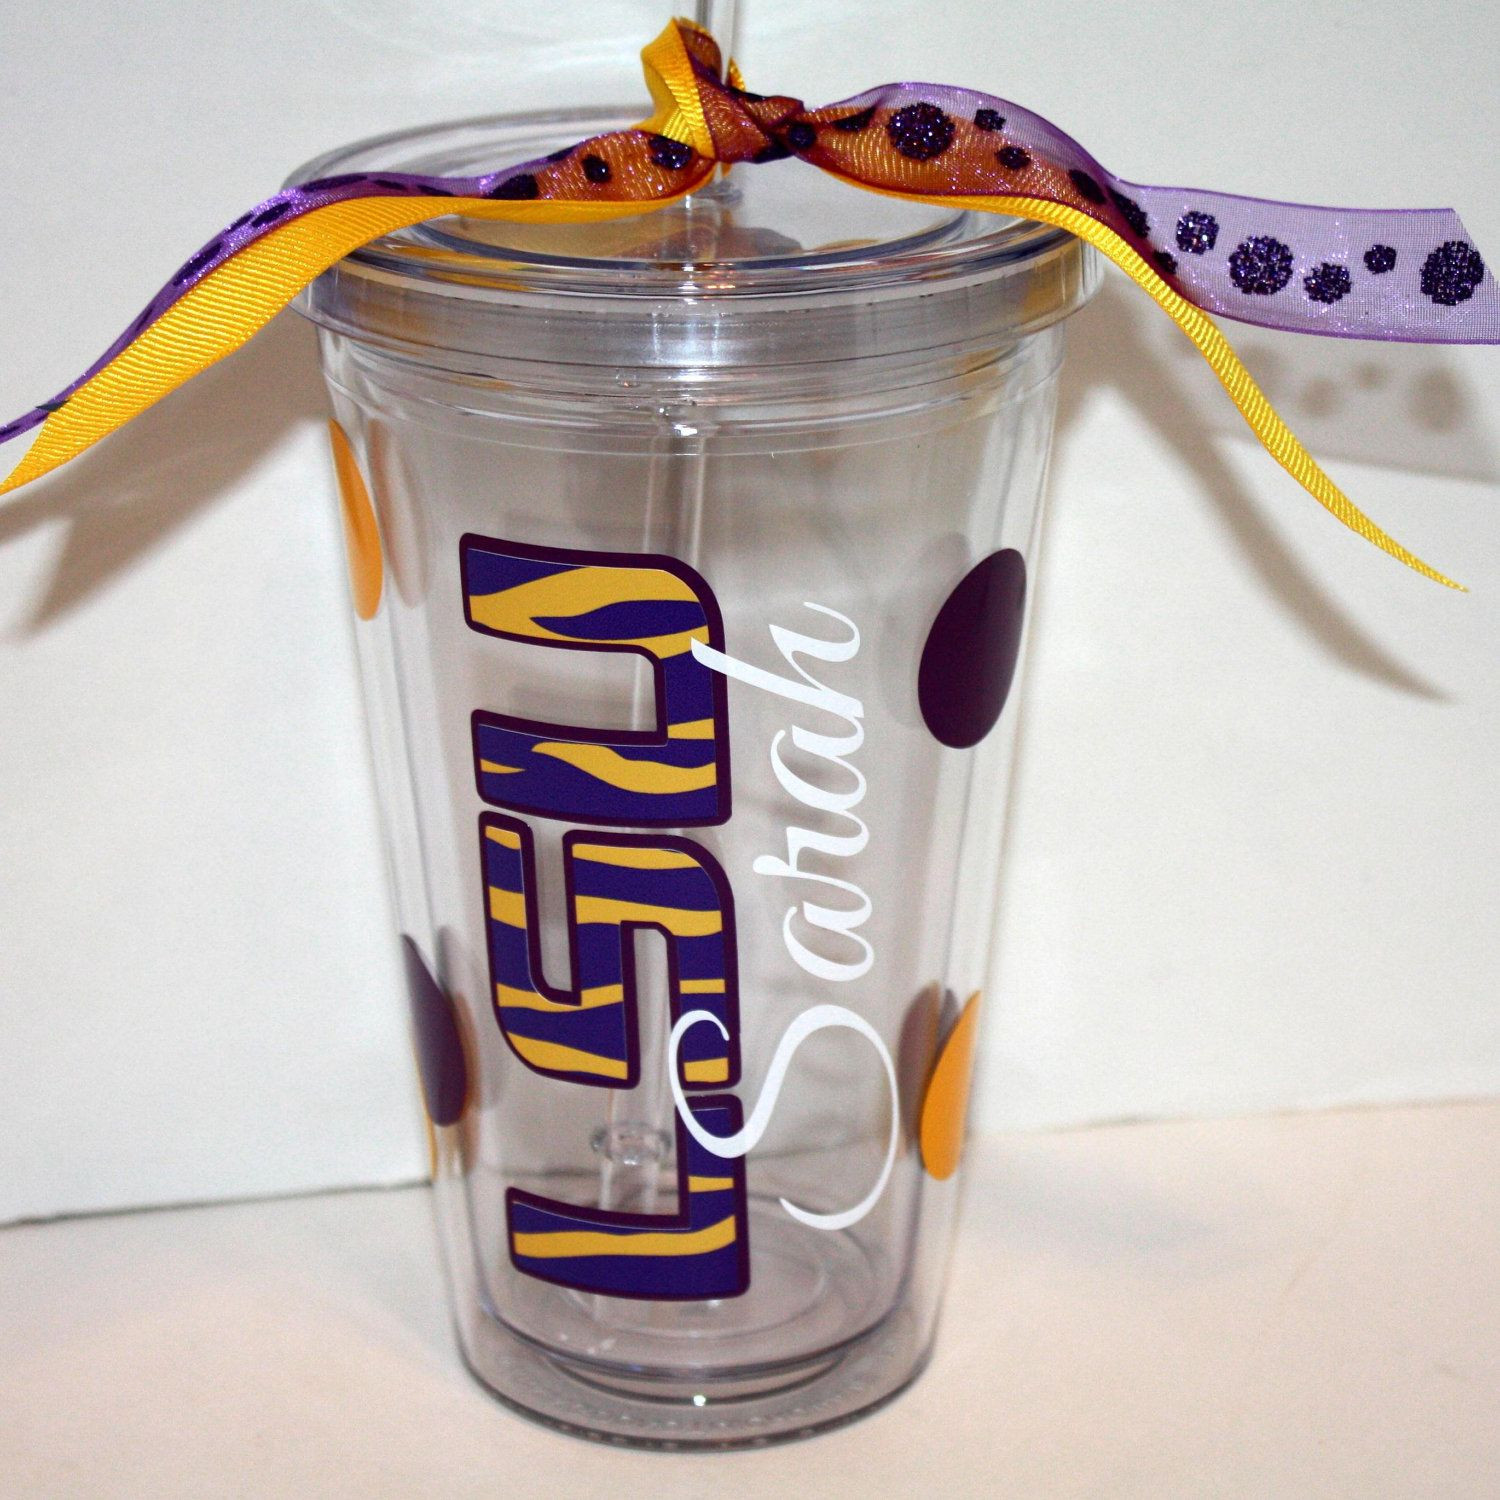 Lsu Graduation Gift Ideas
 Personalized 16 oz Acrylic Tumbler with straw College